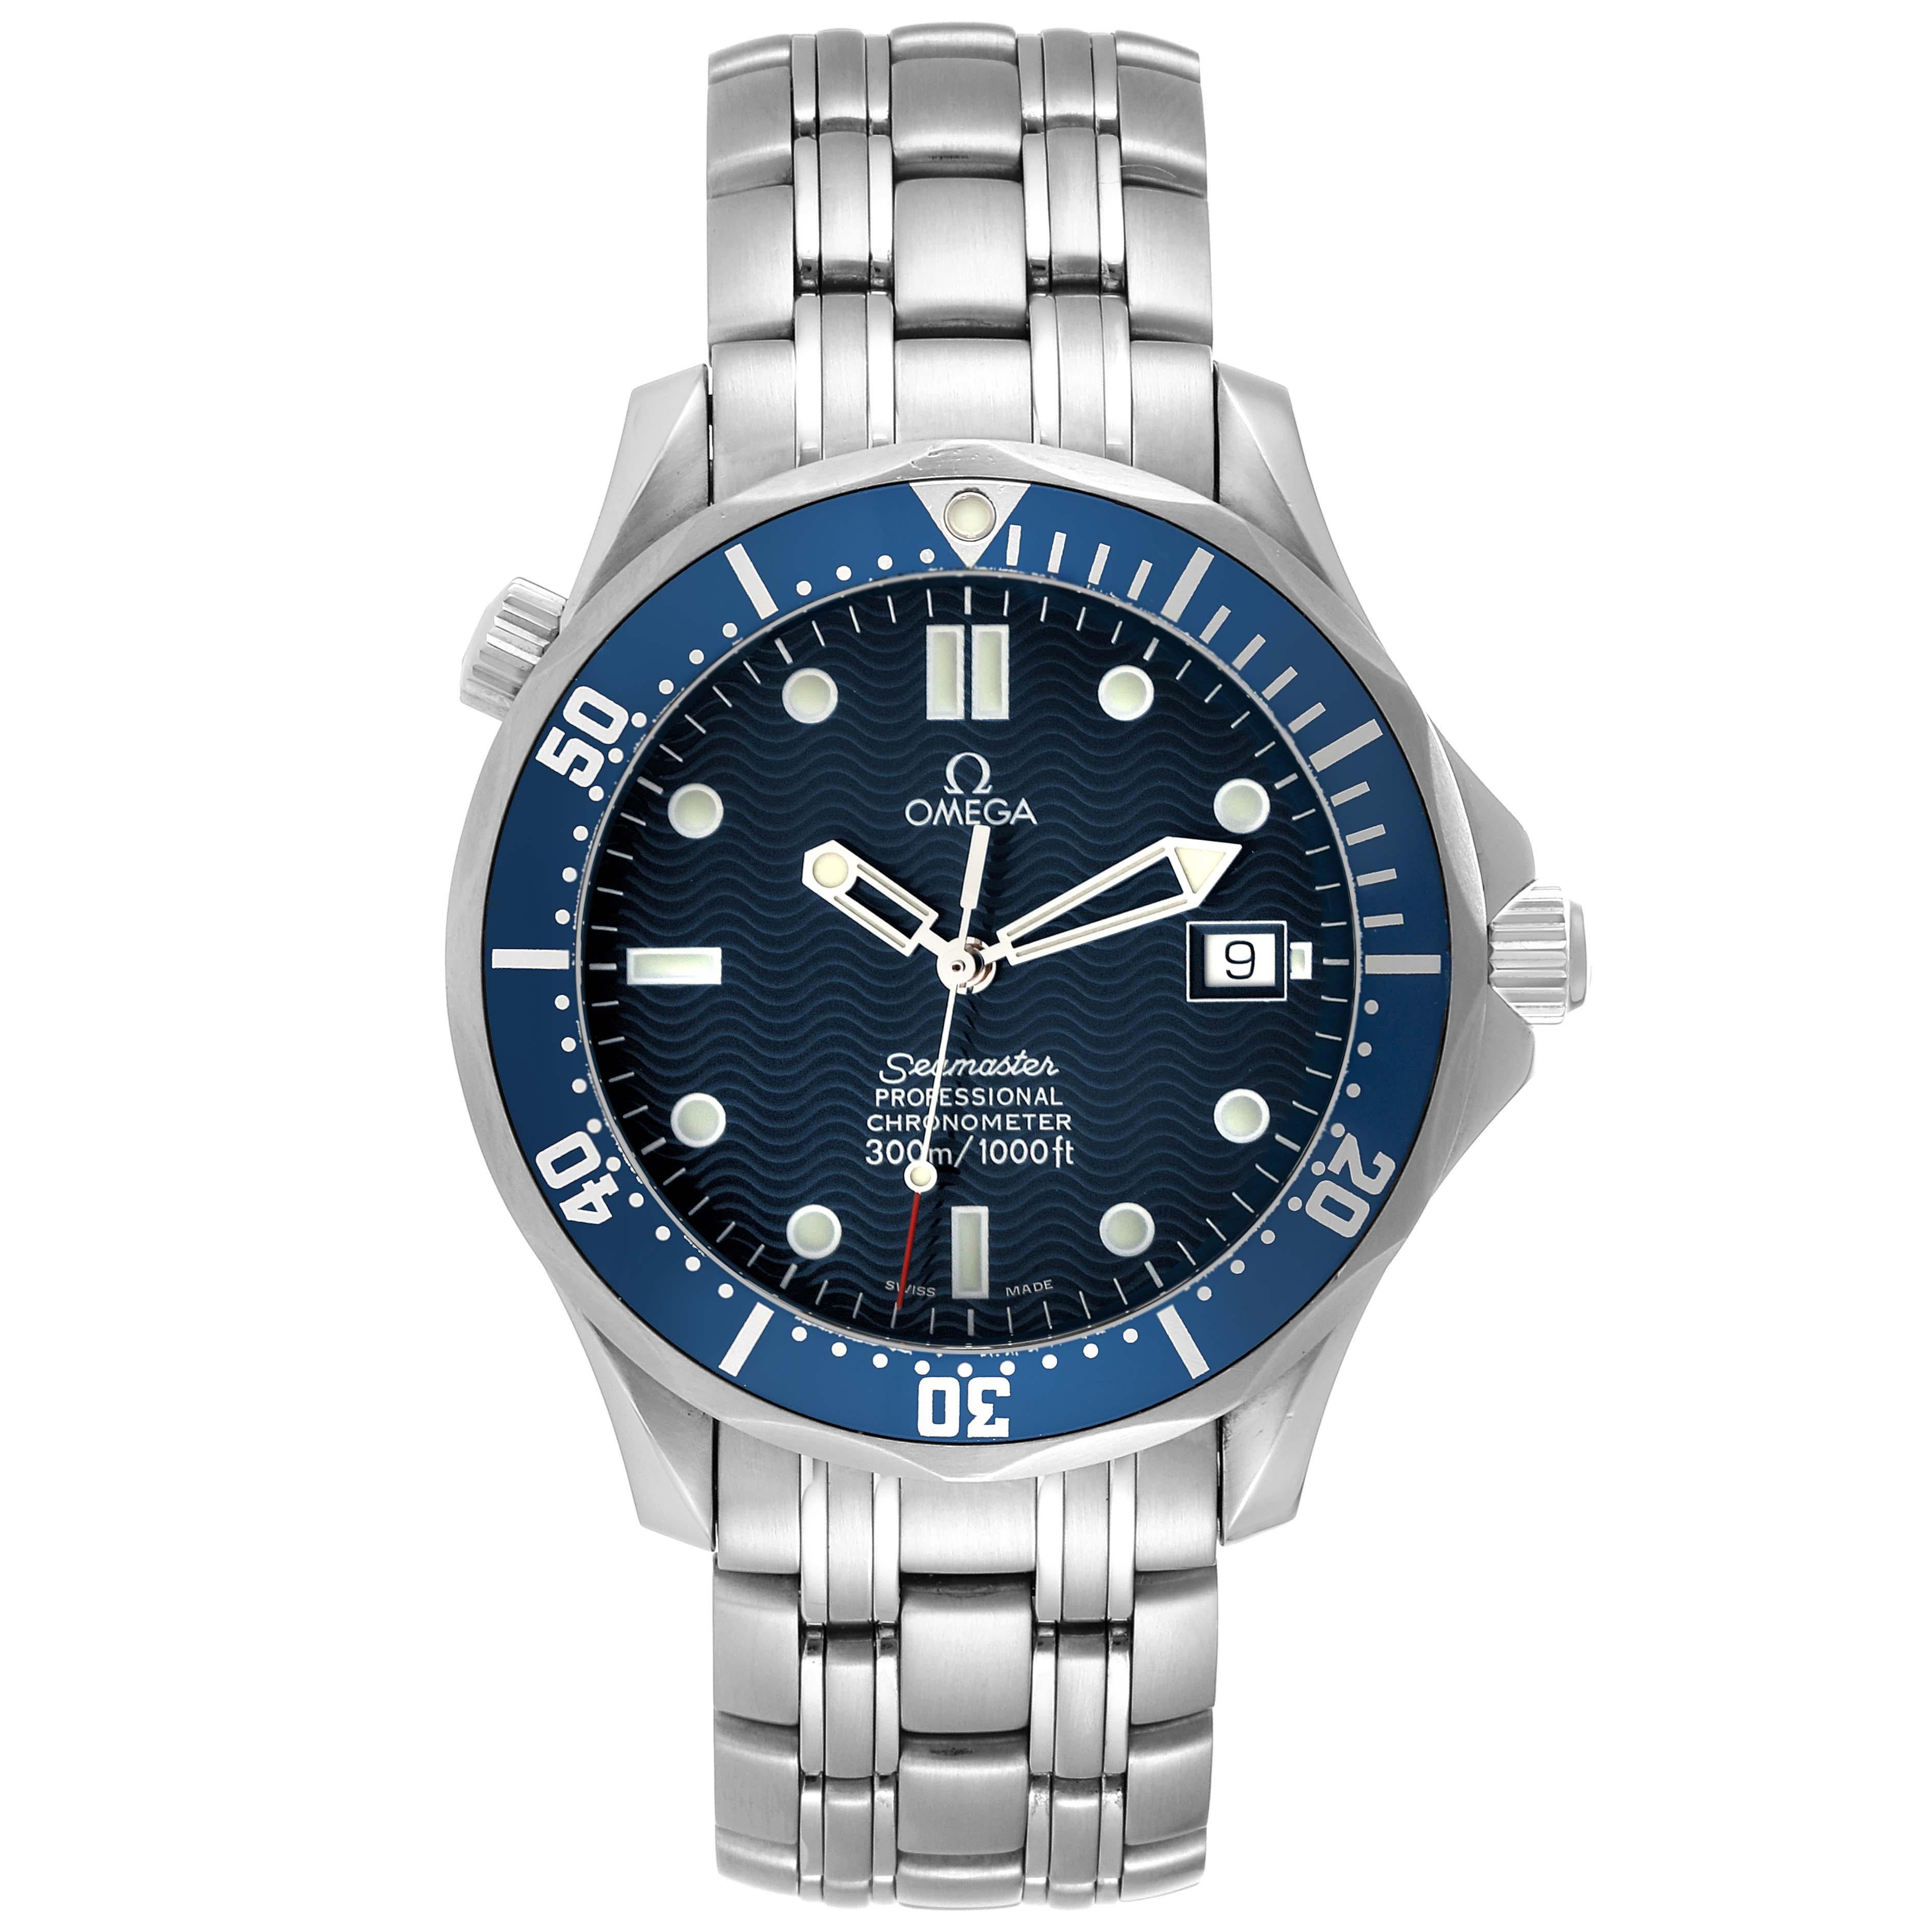 Omega Seamaster Diver 300mm Blue Dial Steel Mens Watch 2531.80.00 Card. Automatic self-winding movement. Stainless steel case 41.0 mm in diameter. Omega logo on the crown. Helium escape valve at 10 o'clock. Blue unidirectional rotating bezel.